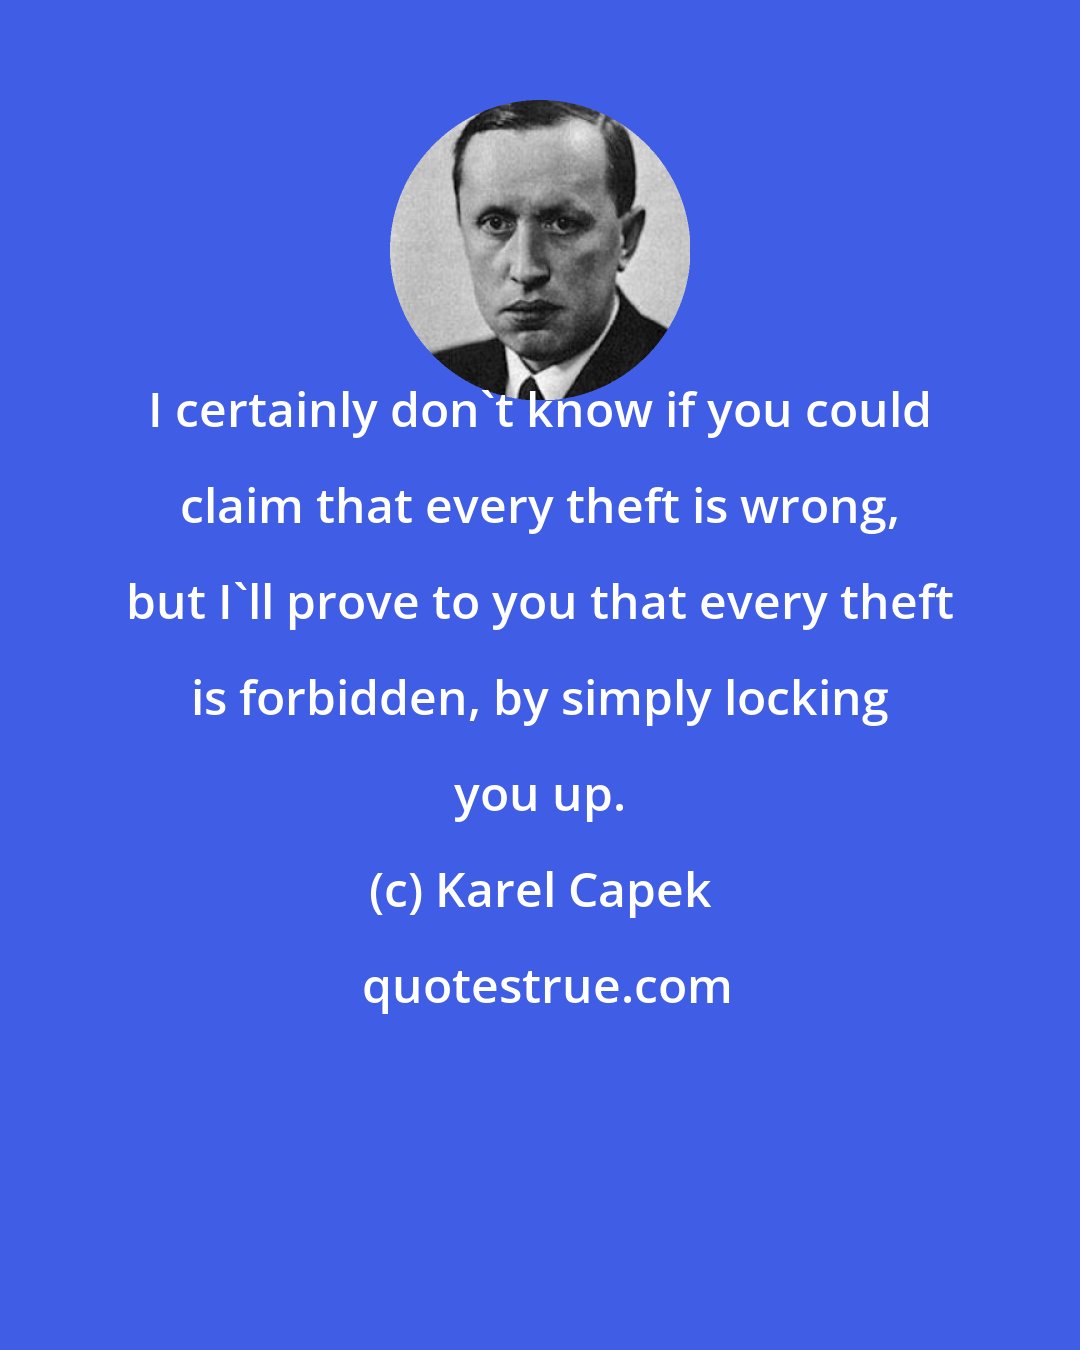 Karel Capek: I certainly don't know if you could claim that every theft is wrong, but I'll prove to you that every theft is forbidden, by simply locking you up.